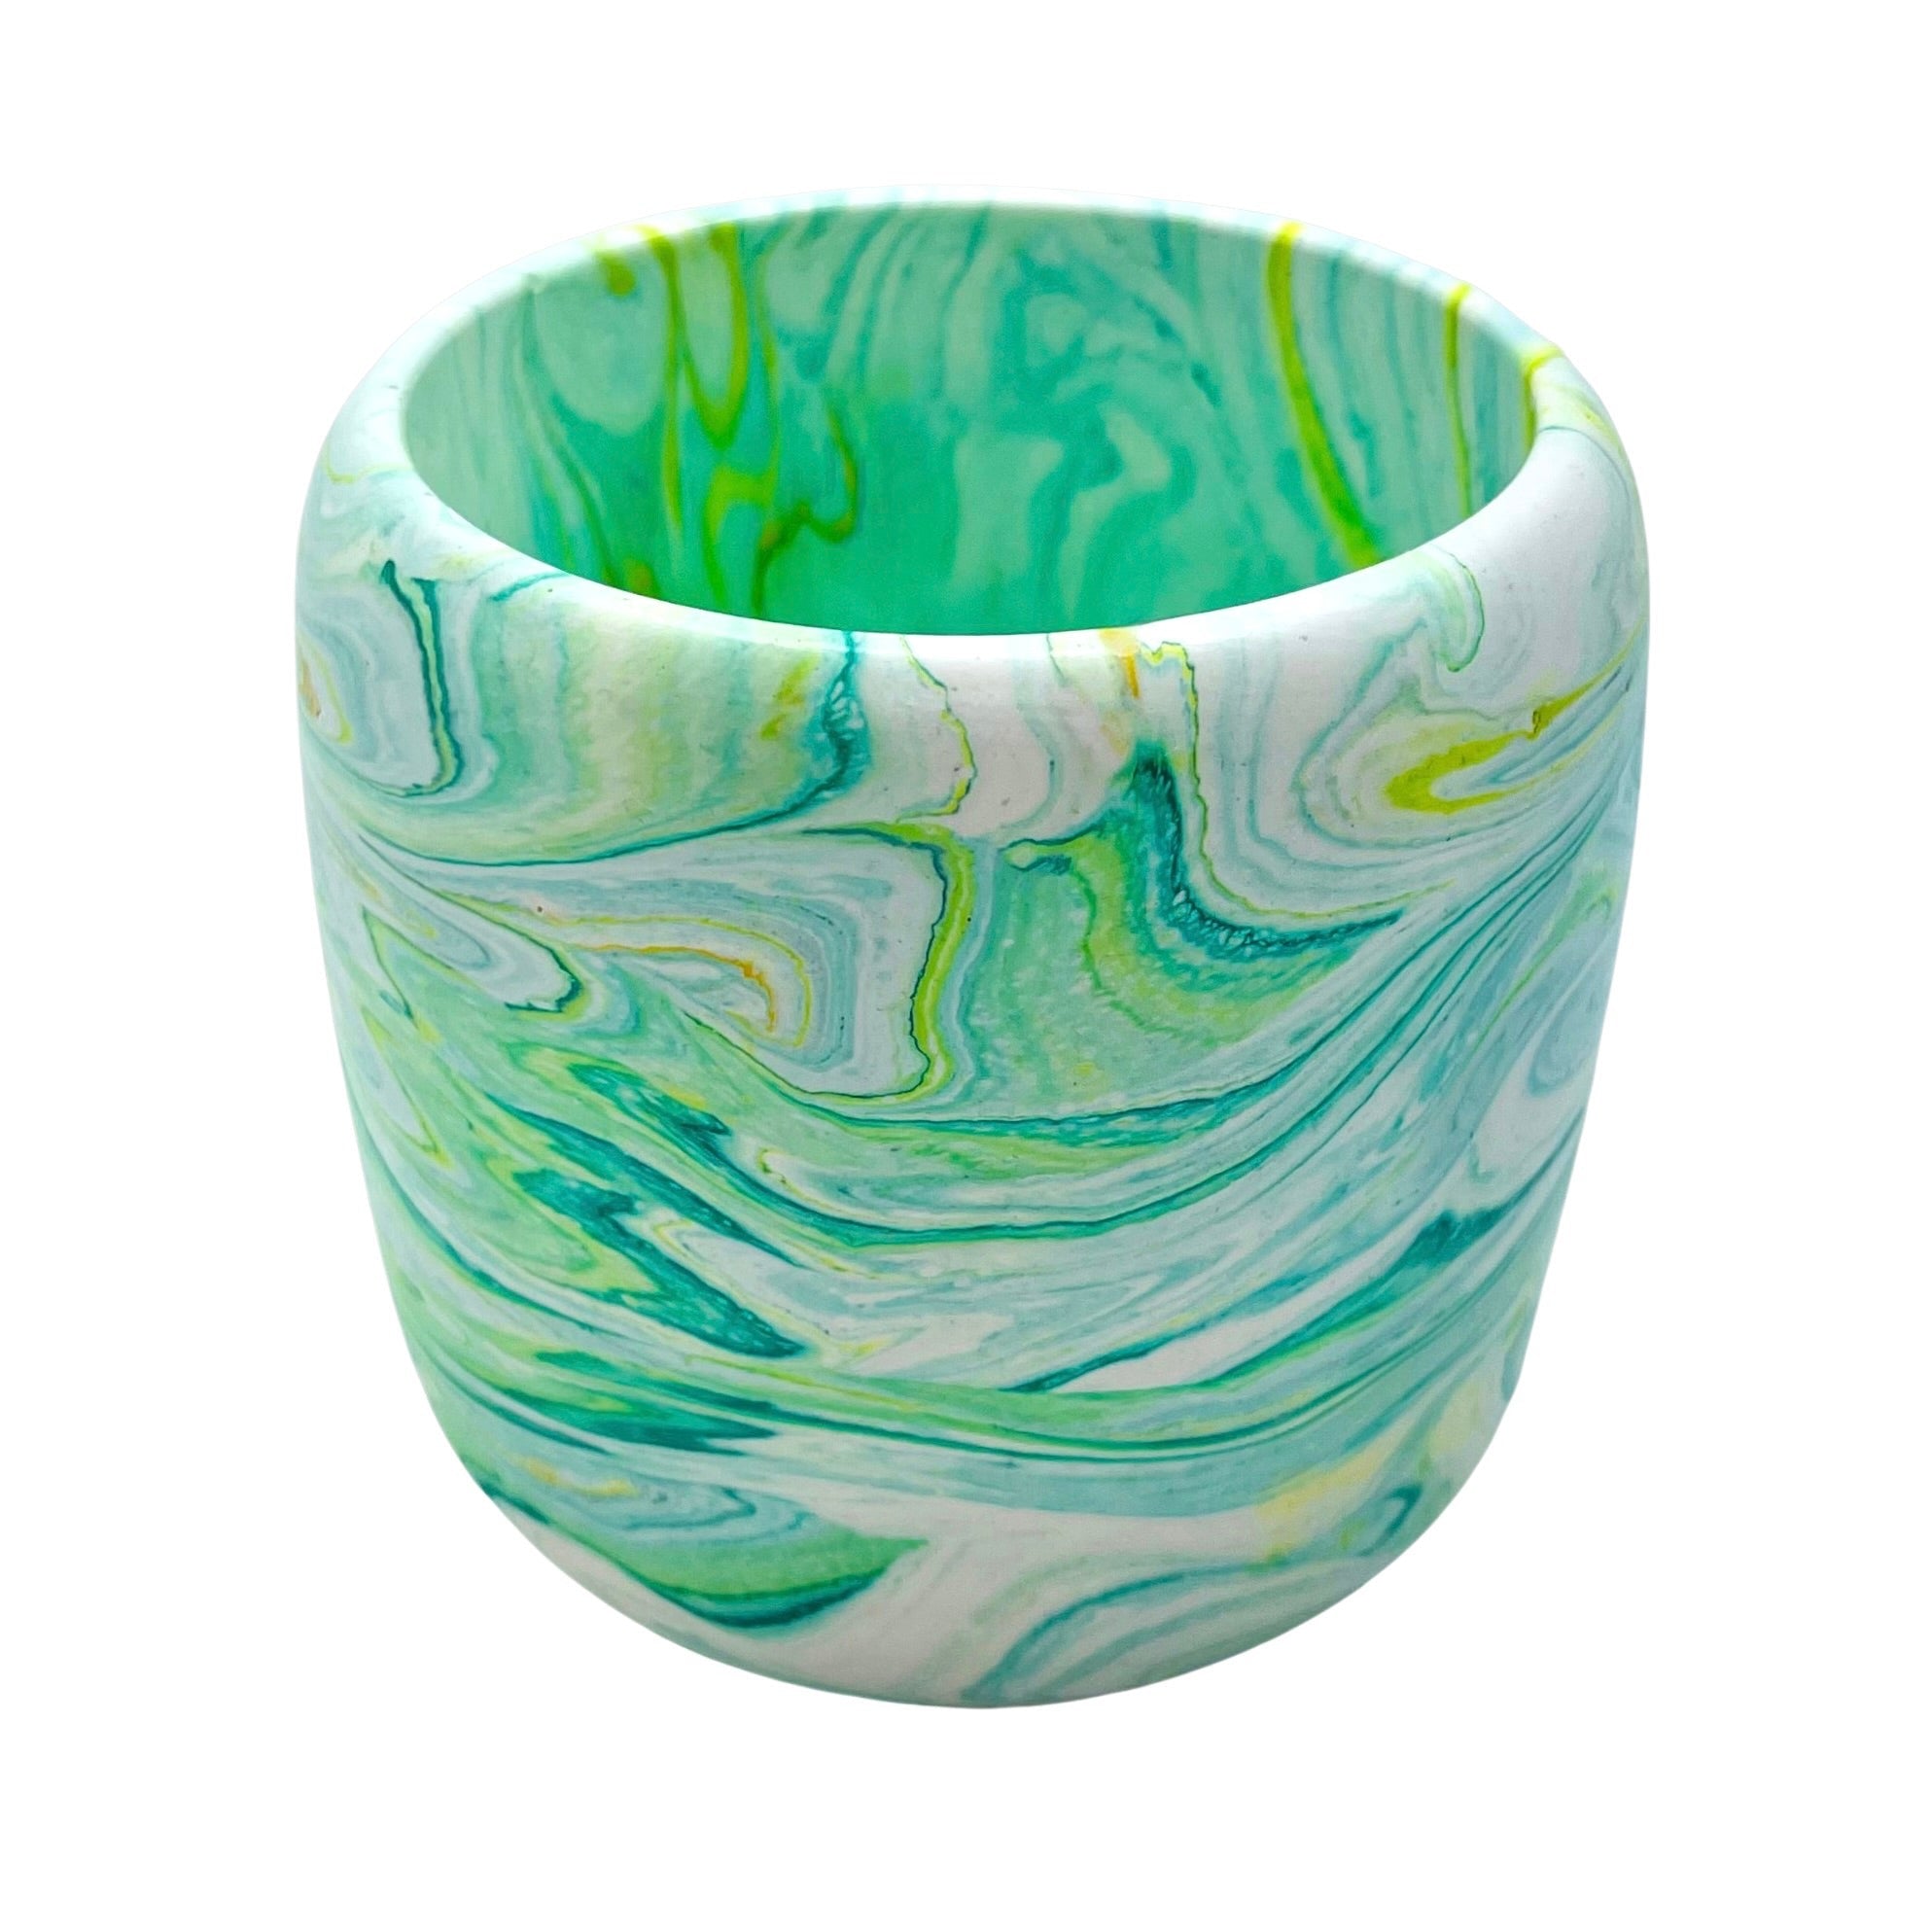 A Jesmonite tumbler with a 8.50cm diameter marbled with teal and lime green pigment.